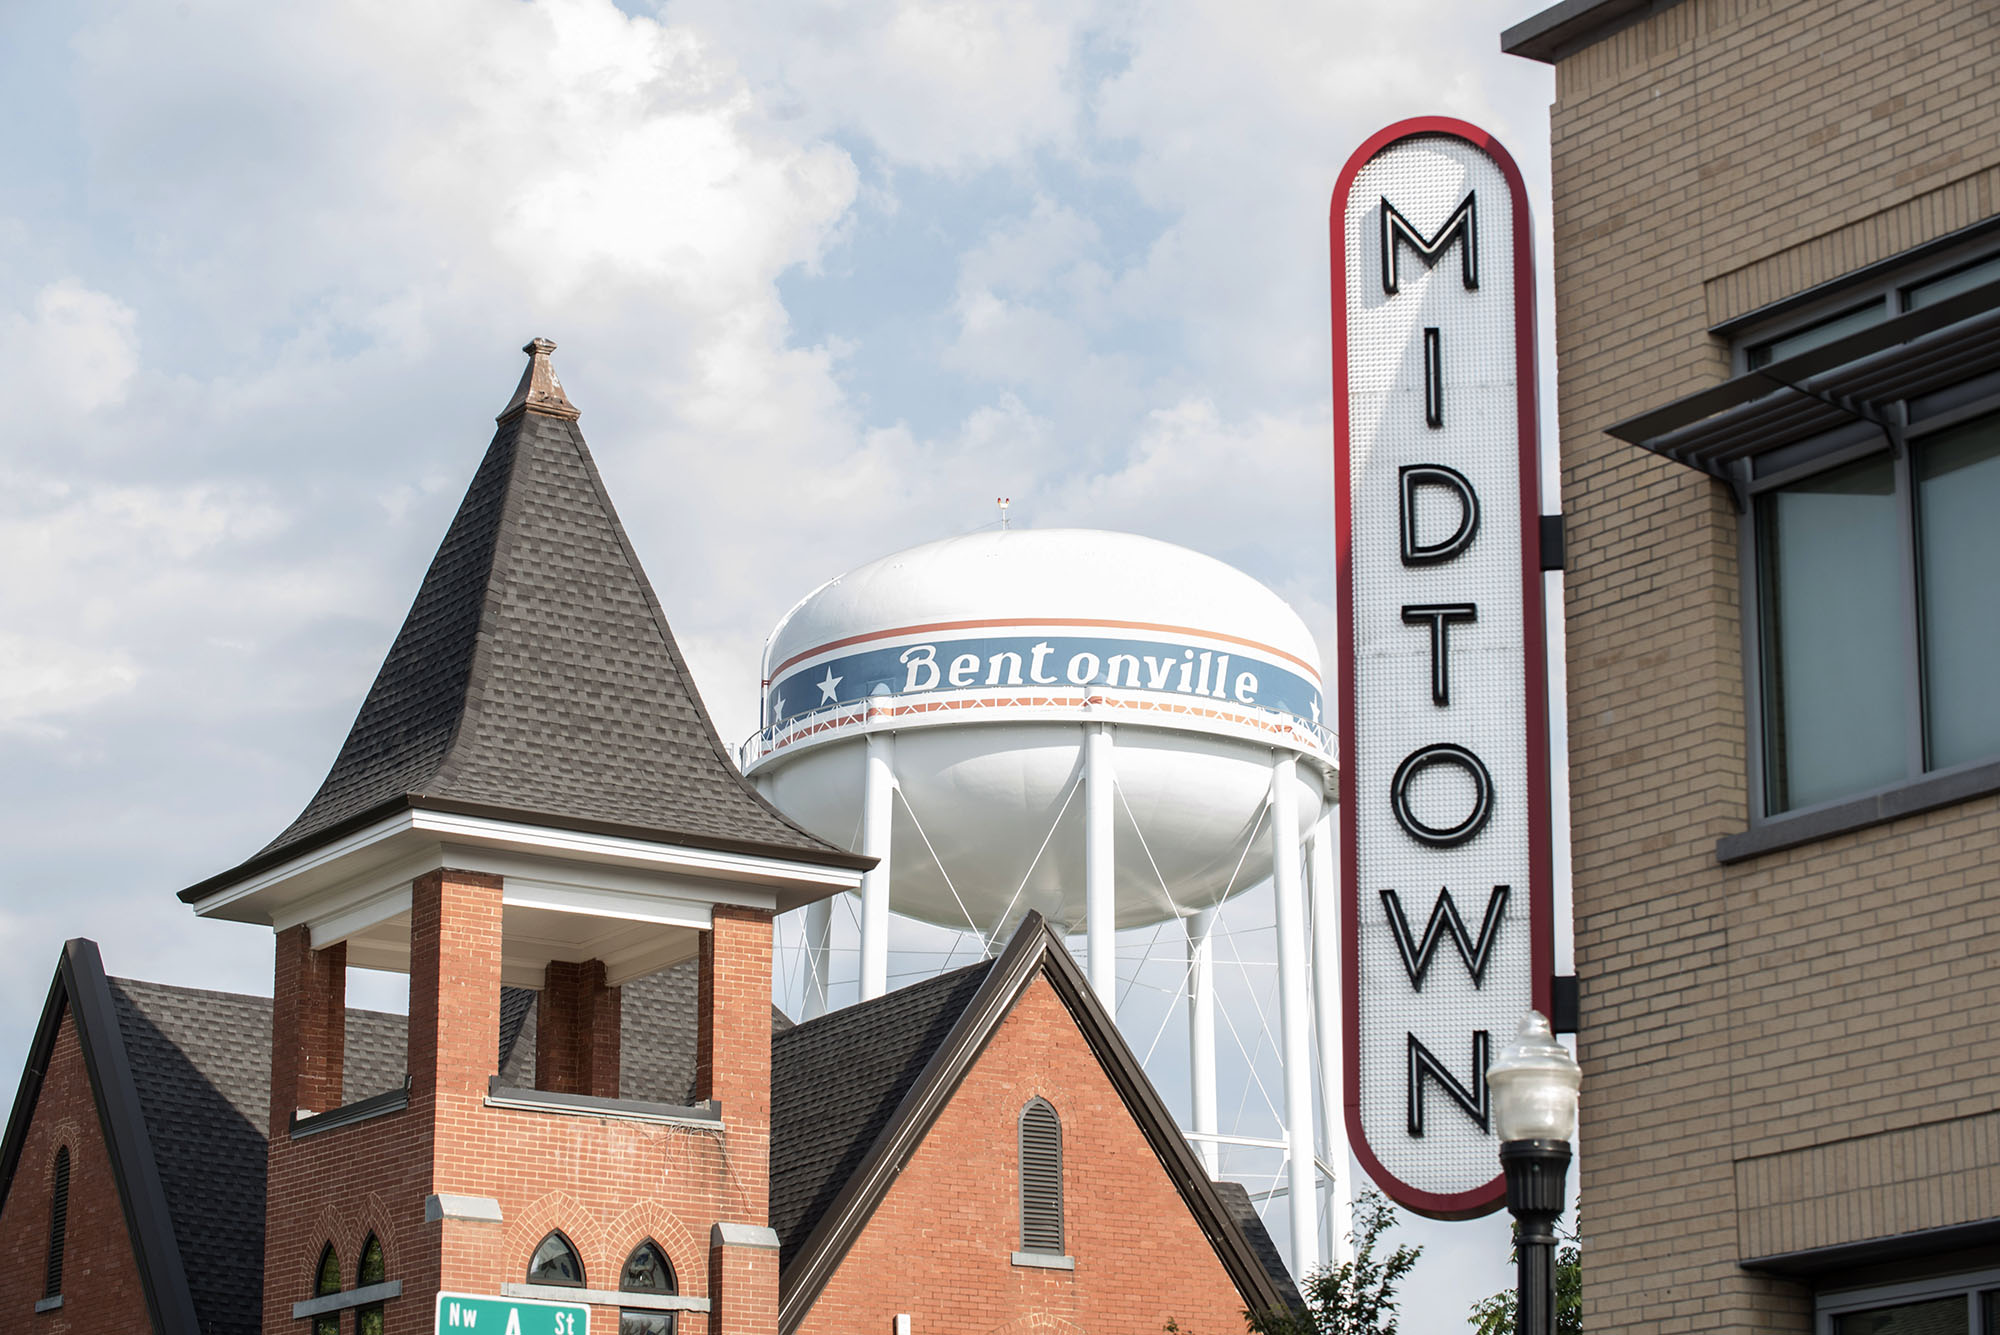 Know the News - Reflecting on downtown Bentonville's growth